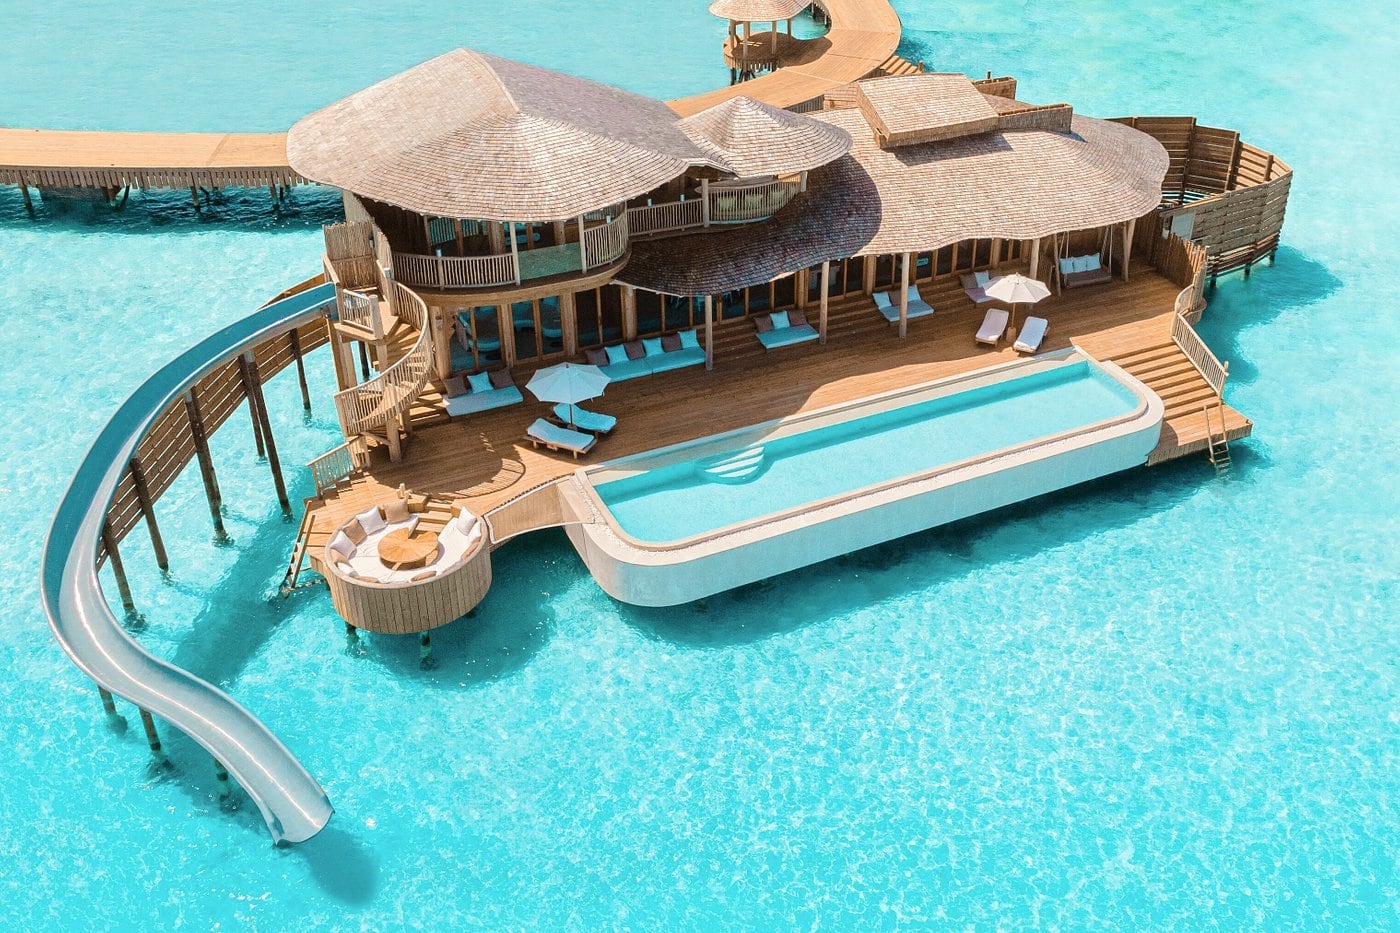 Soneva Jani Maldives luxury resort with pool and water slide surrounded by azure water